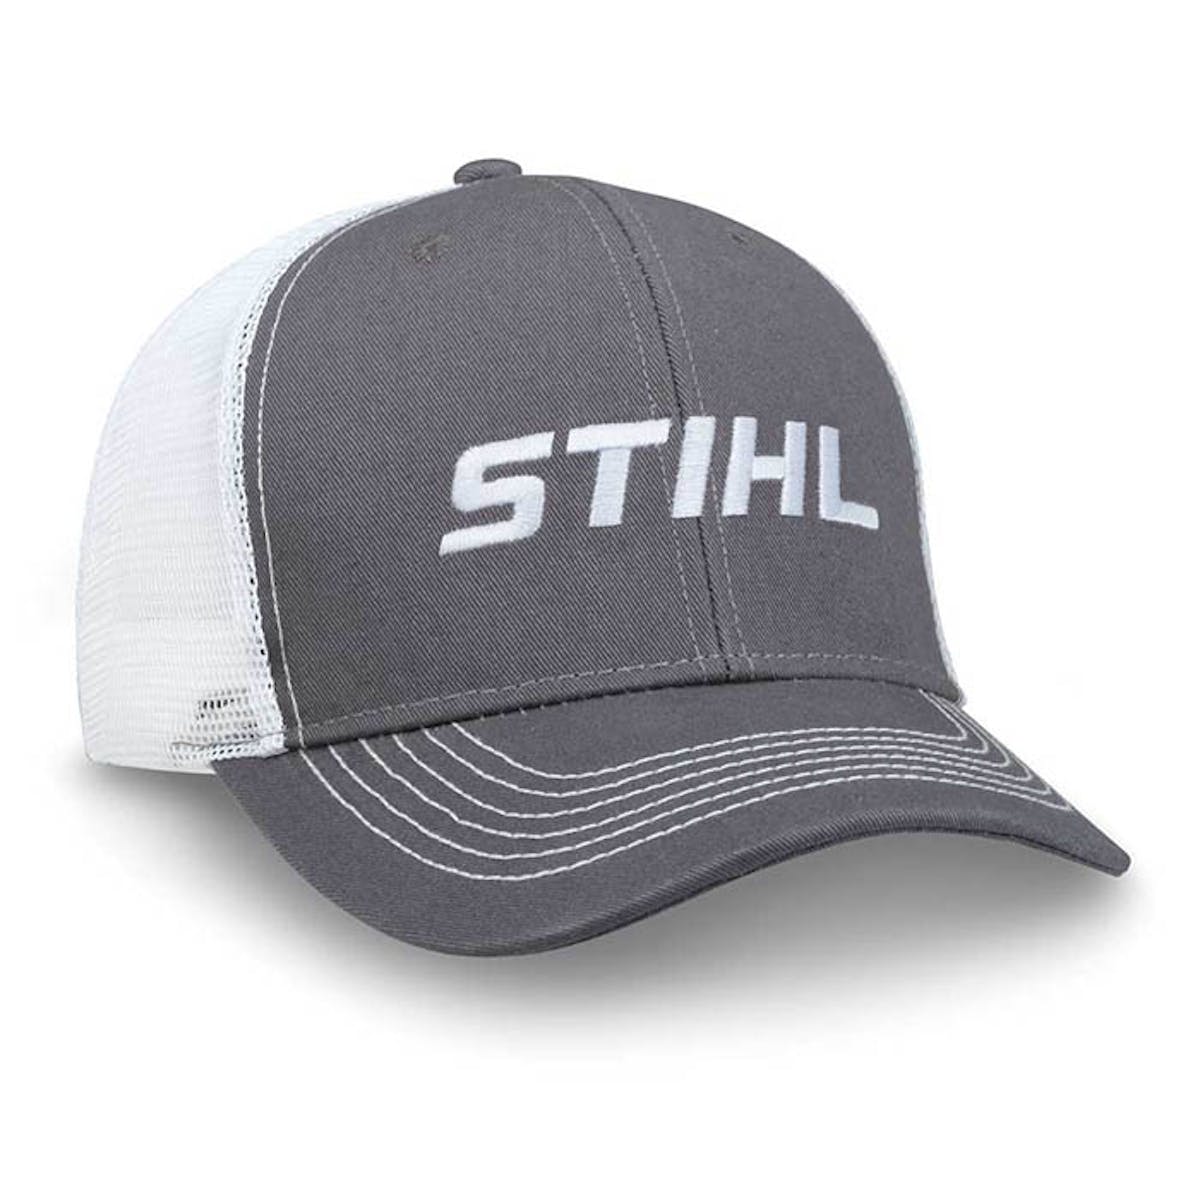 Gray and White Mesh Back Value Cap